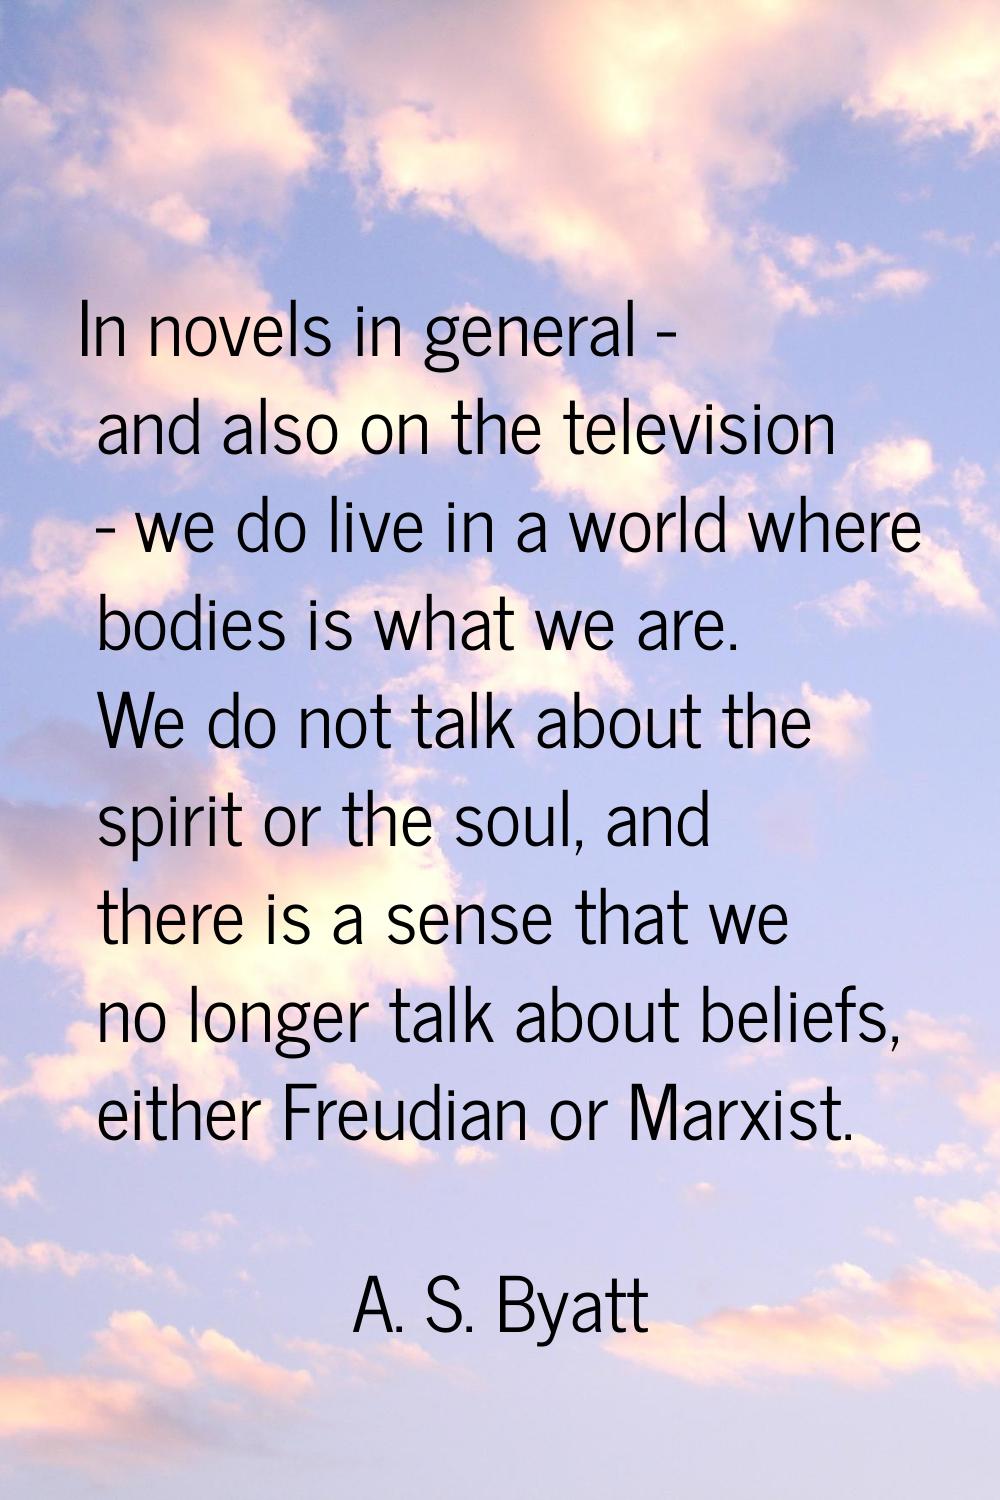 In novels in general - and also on the television - we do live in a world where bodies is what we a